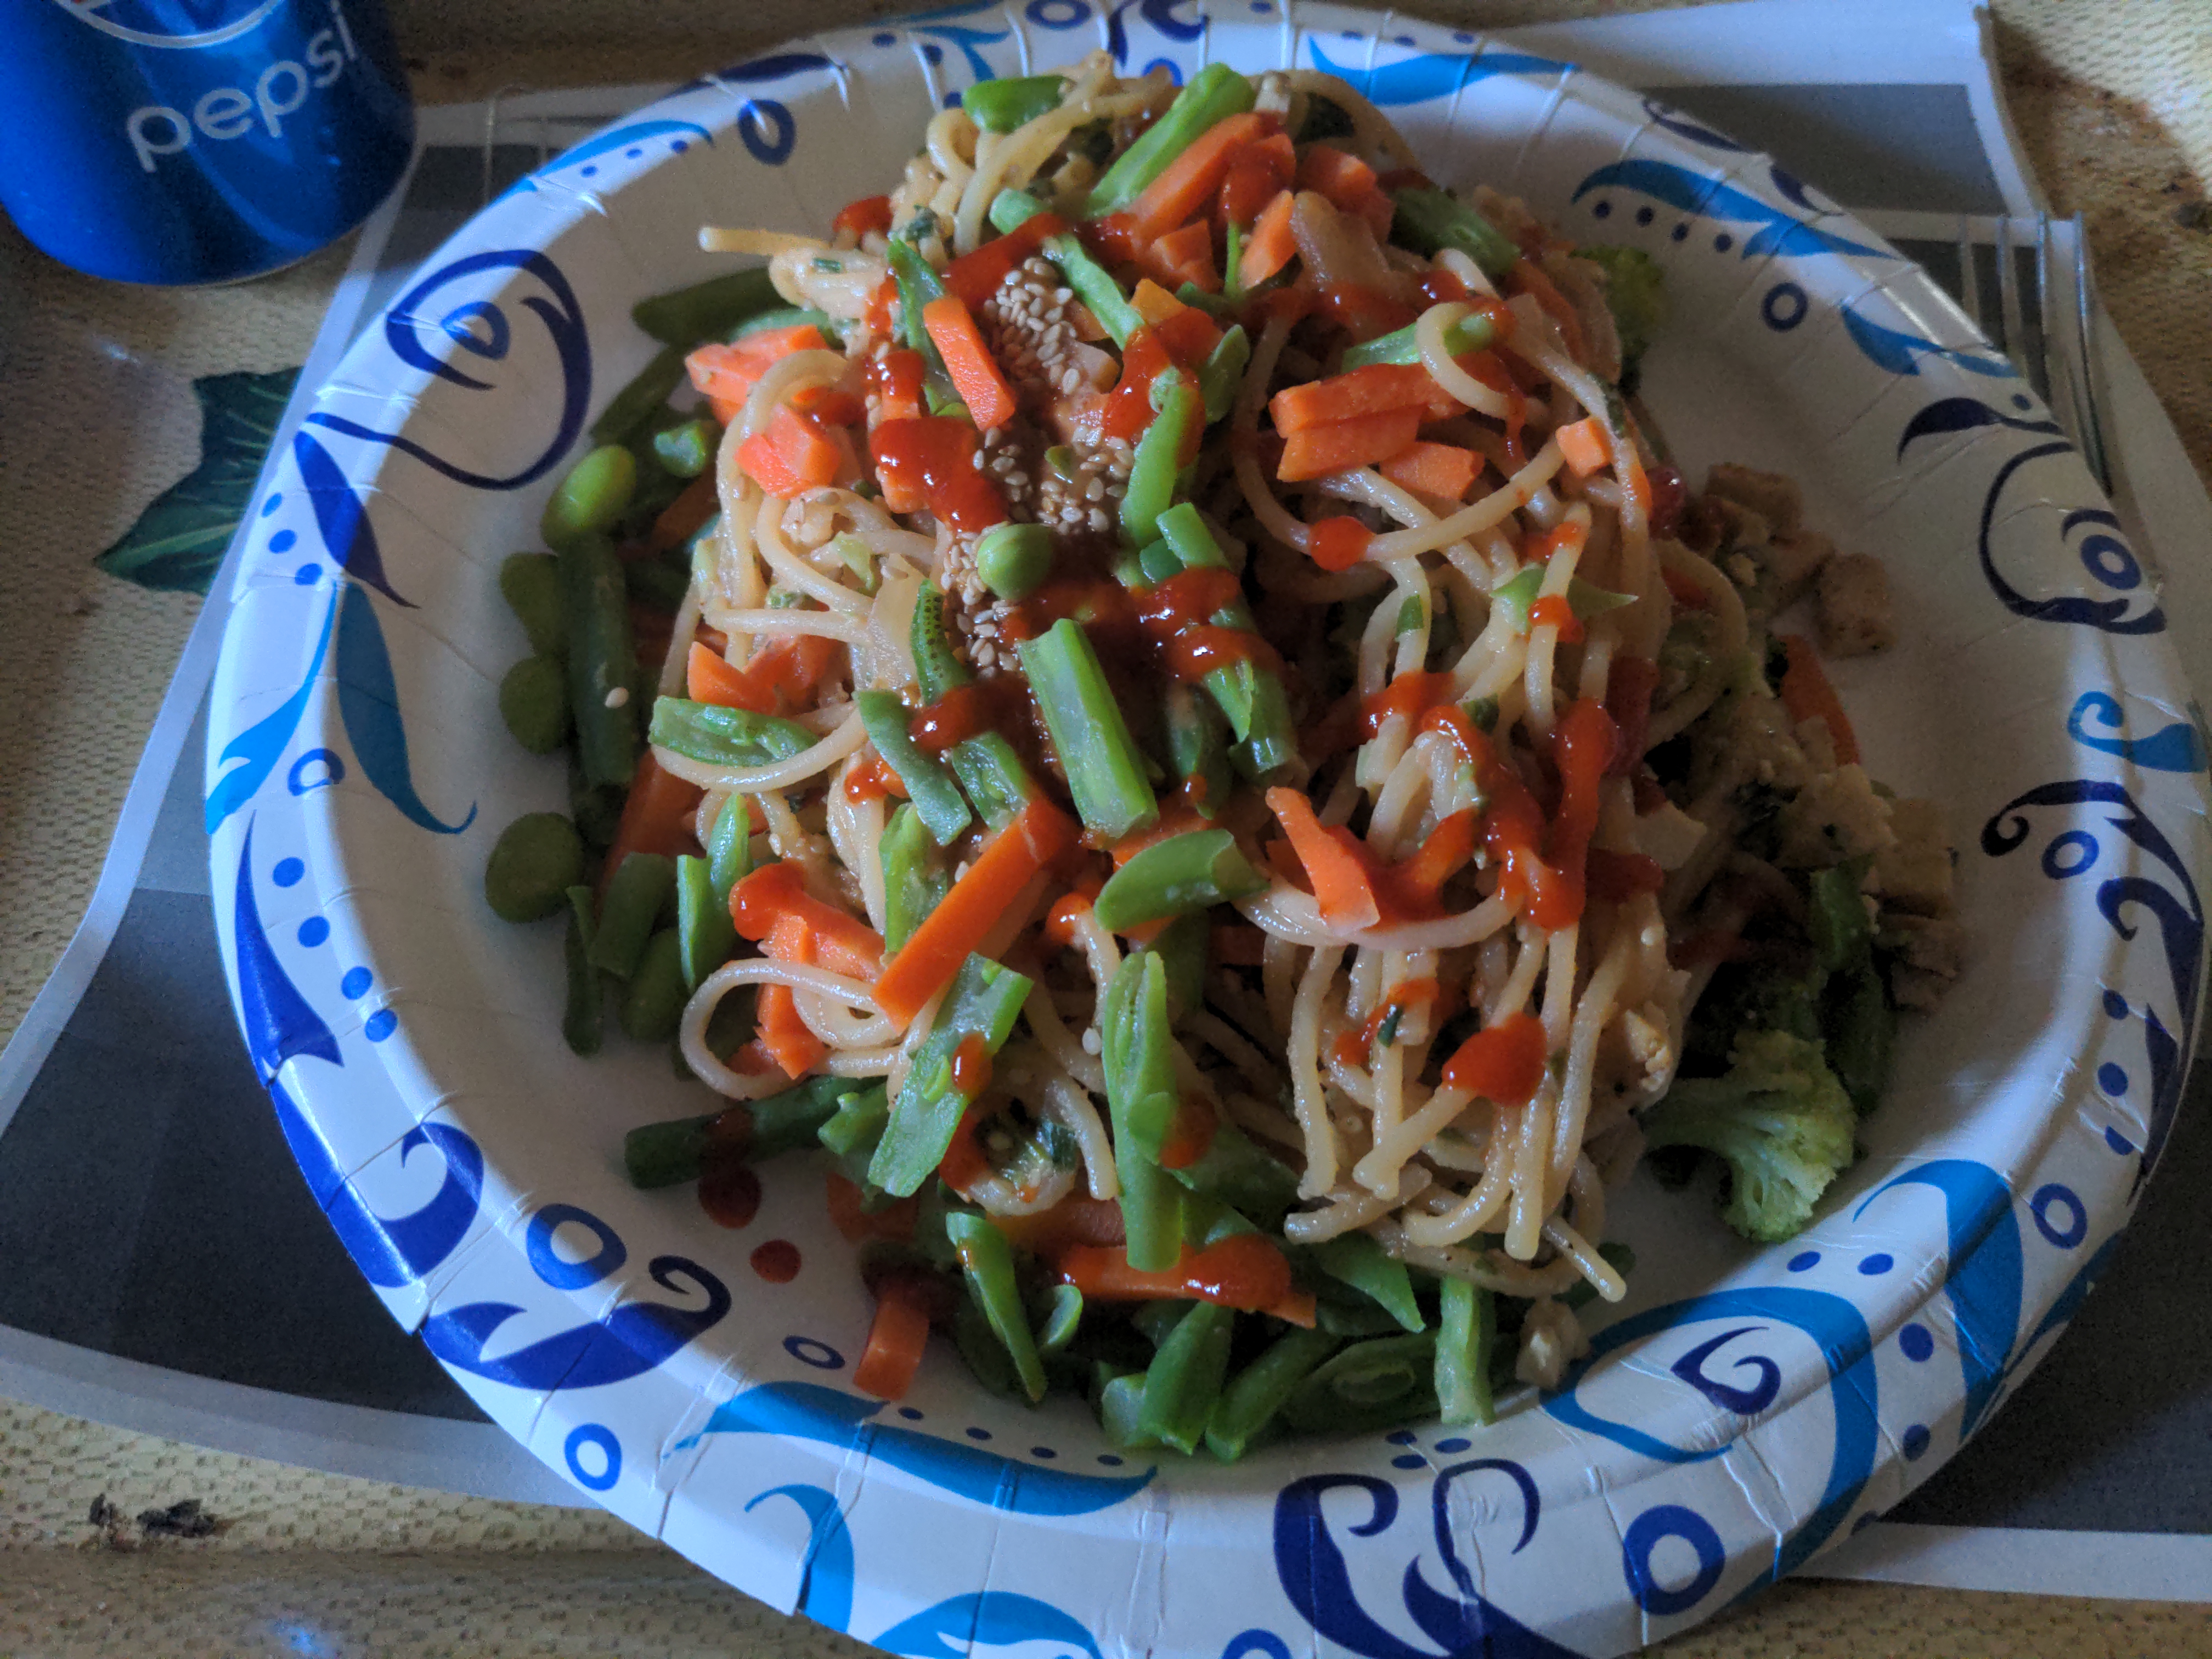 Amy's Chinese noodles and vegetables on a paper plate with sriracha sauce, and a can of Pepsi, on a TV tray